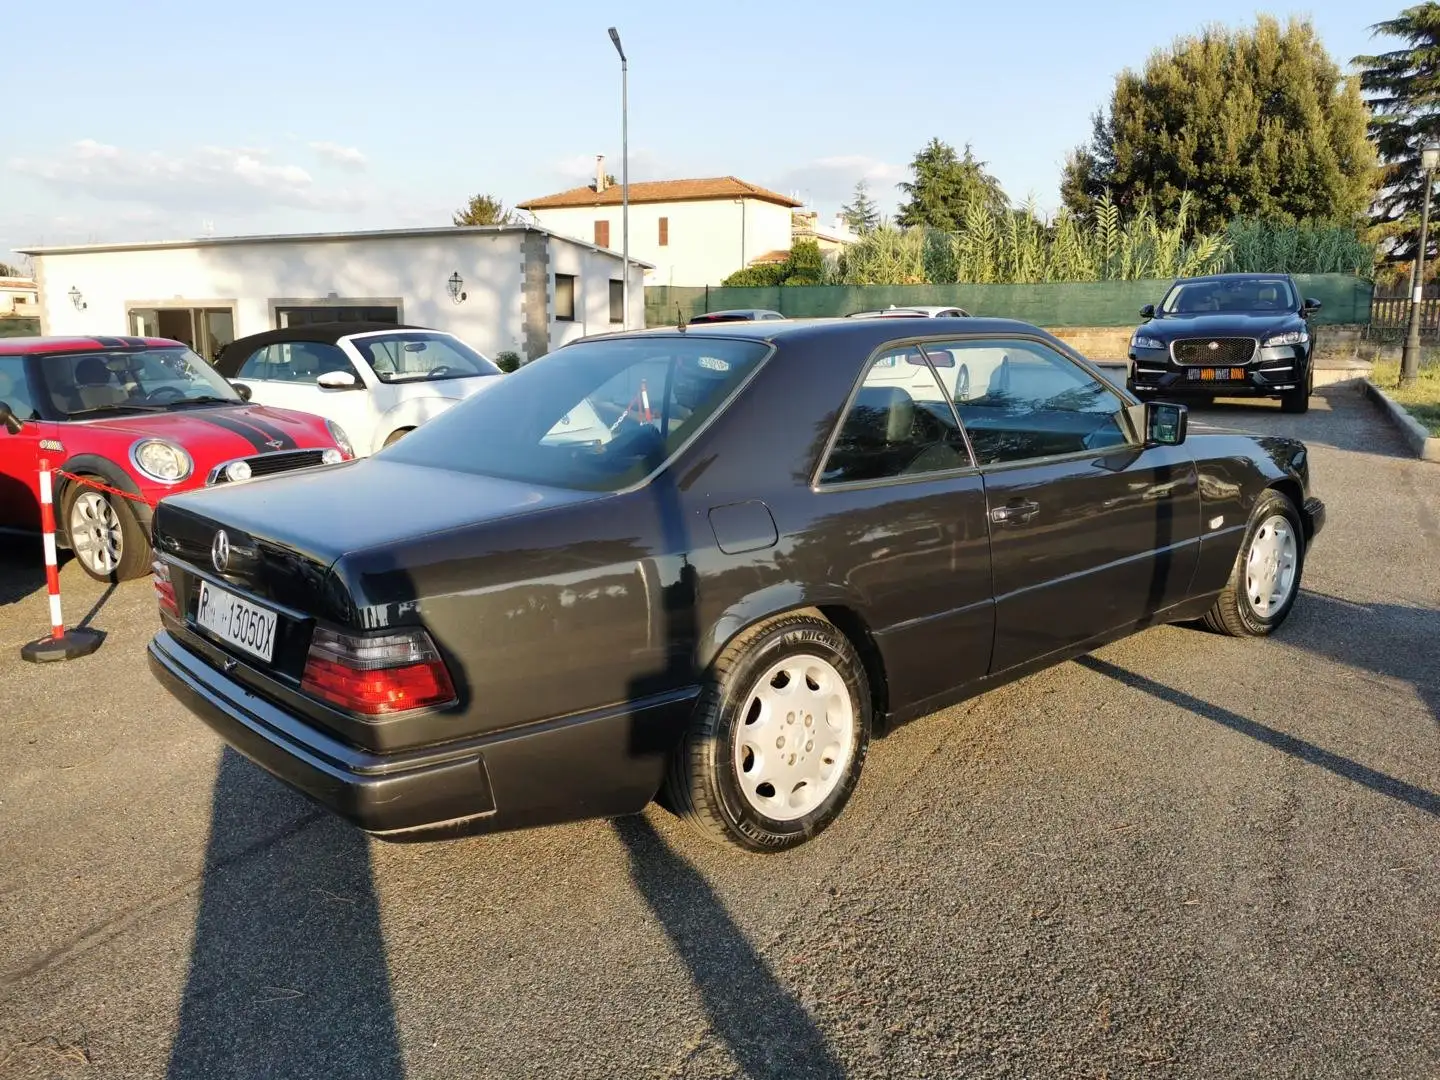 Mercedes-Benz CE 230 COUPE - ABS  - 1989 - RATE AUTO MOTO SCOOTER Negru - 2